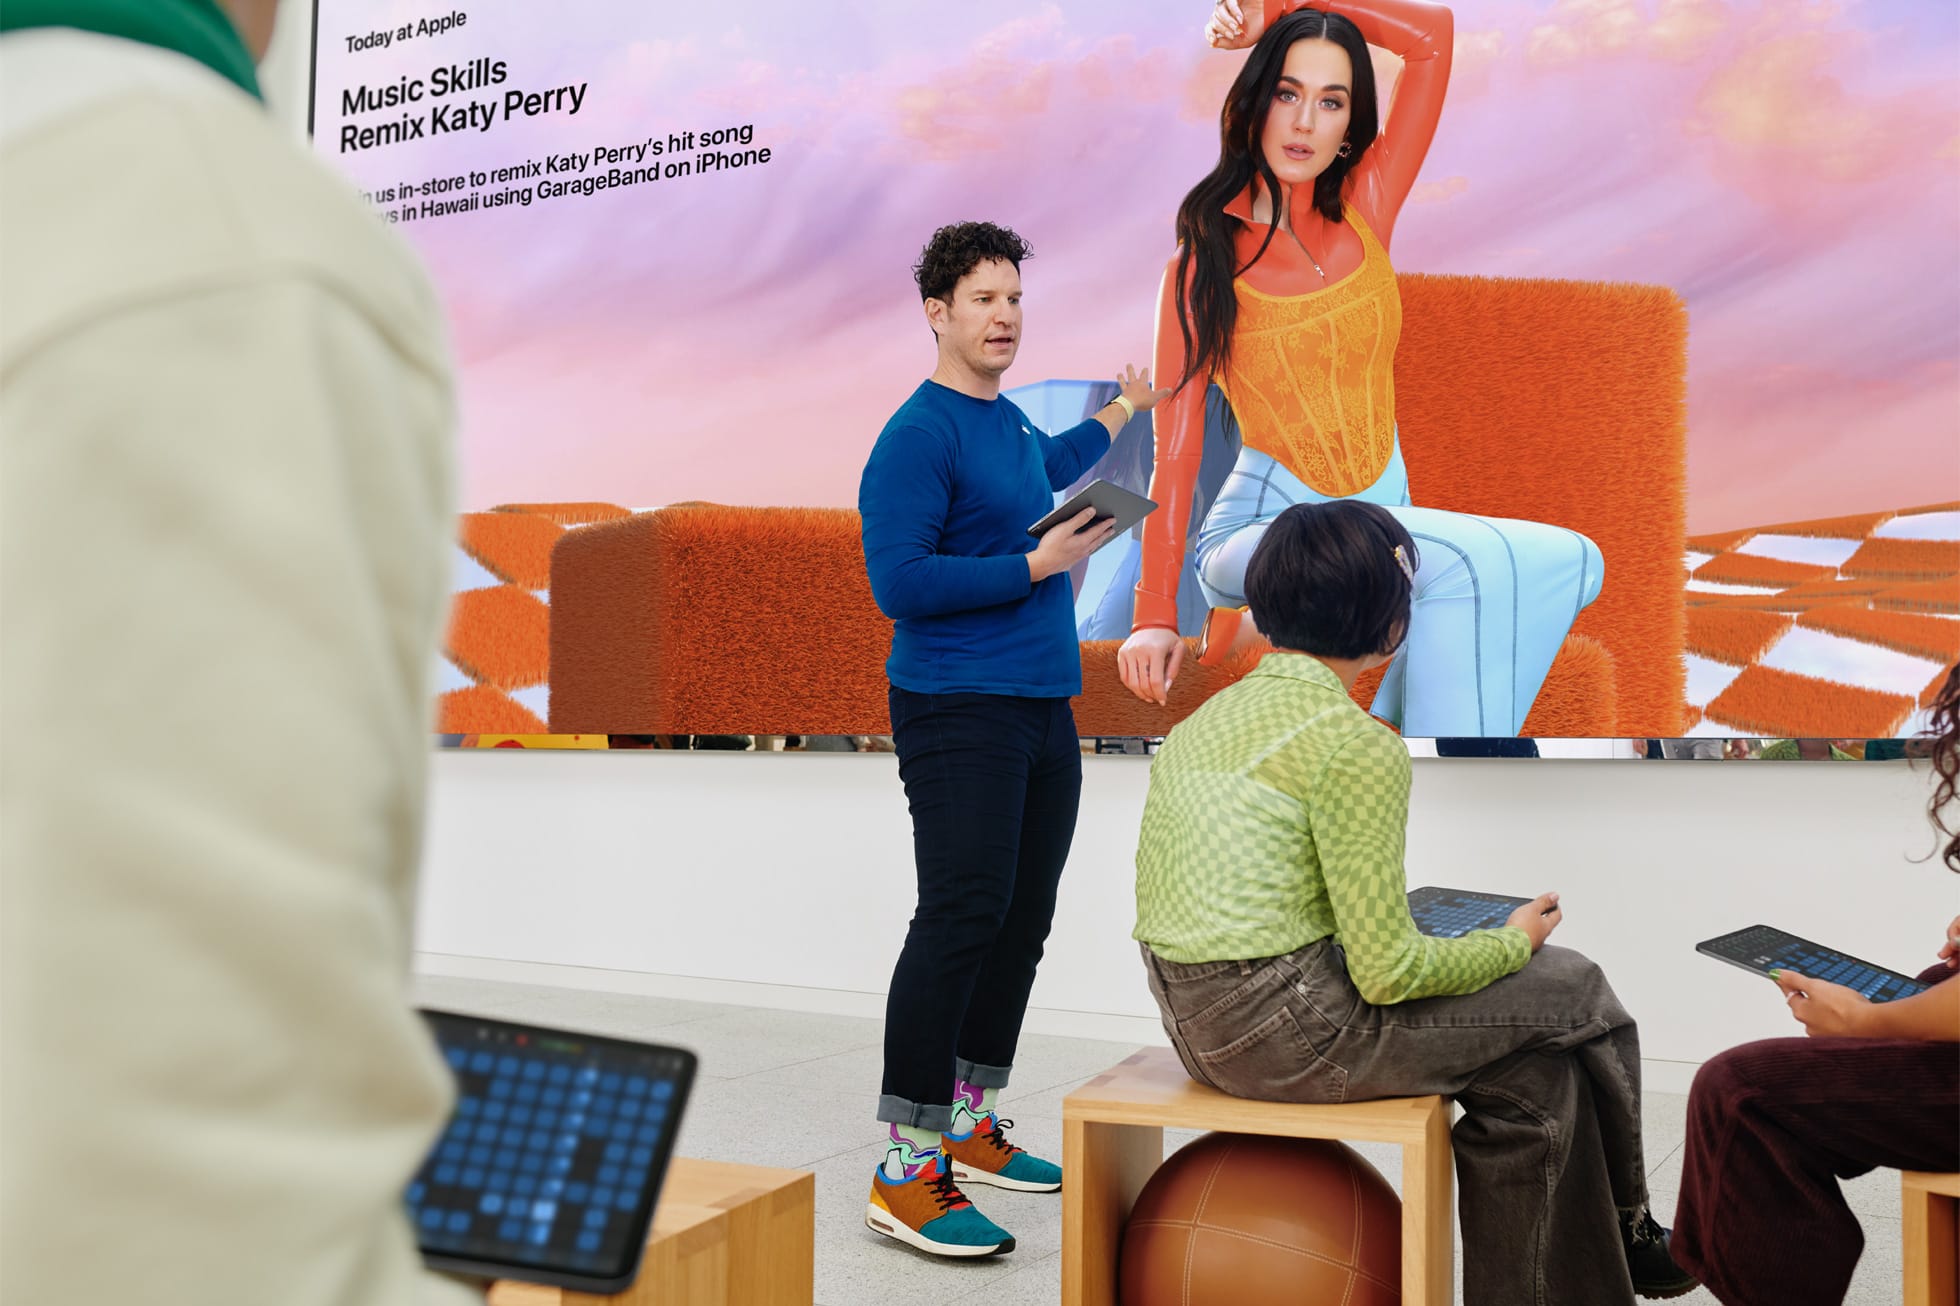 Customers can visit Apple Stores to take part in the new Today at Apple session, Music Skills: Remix Katy Perry.